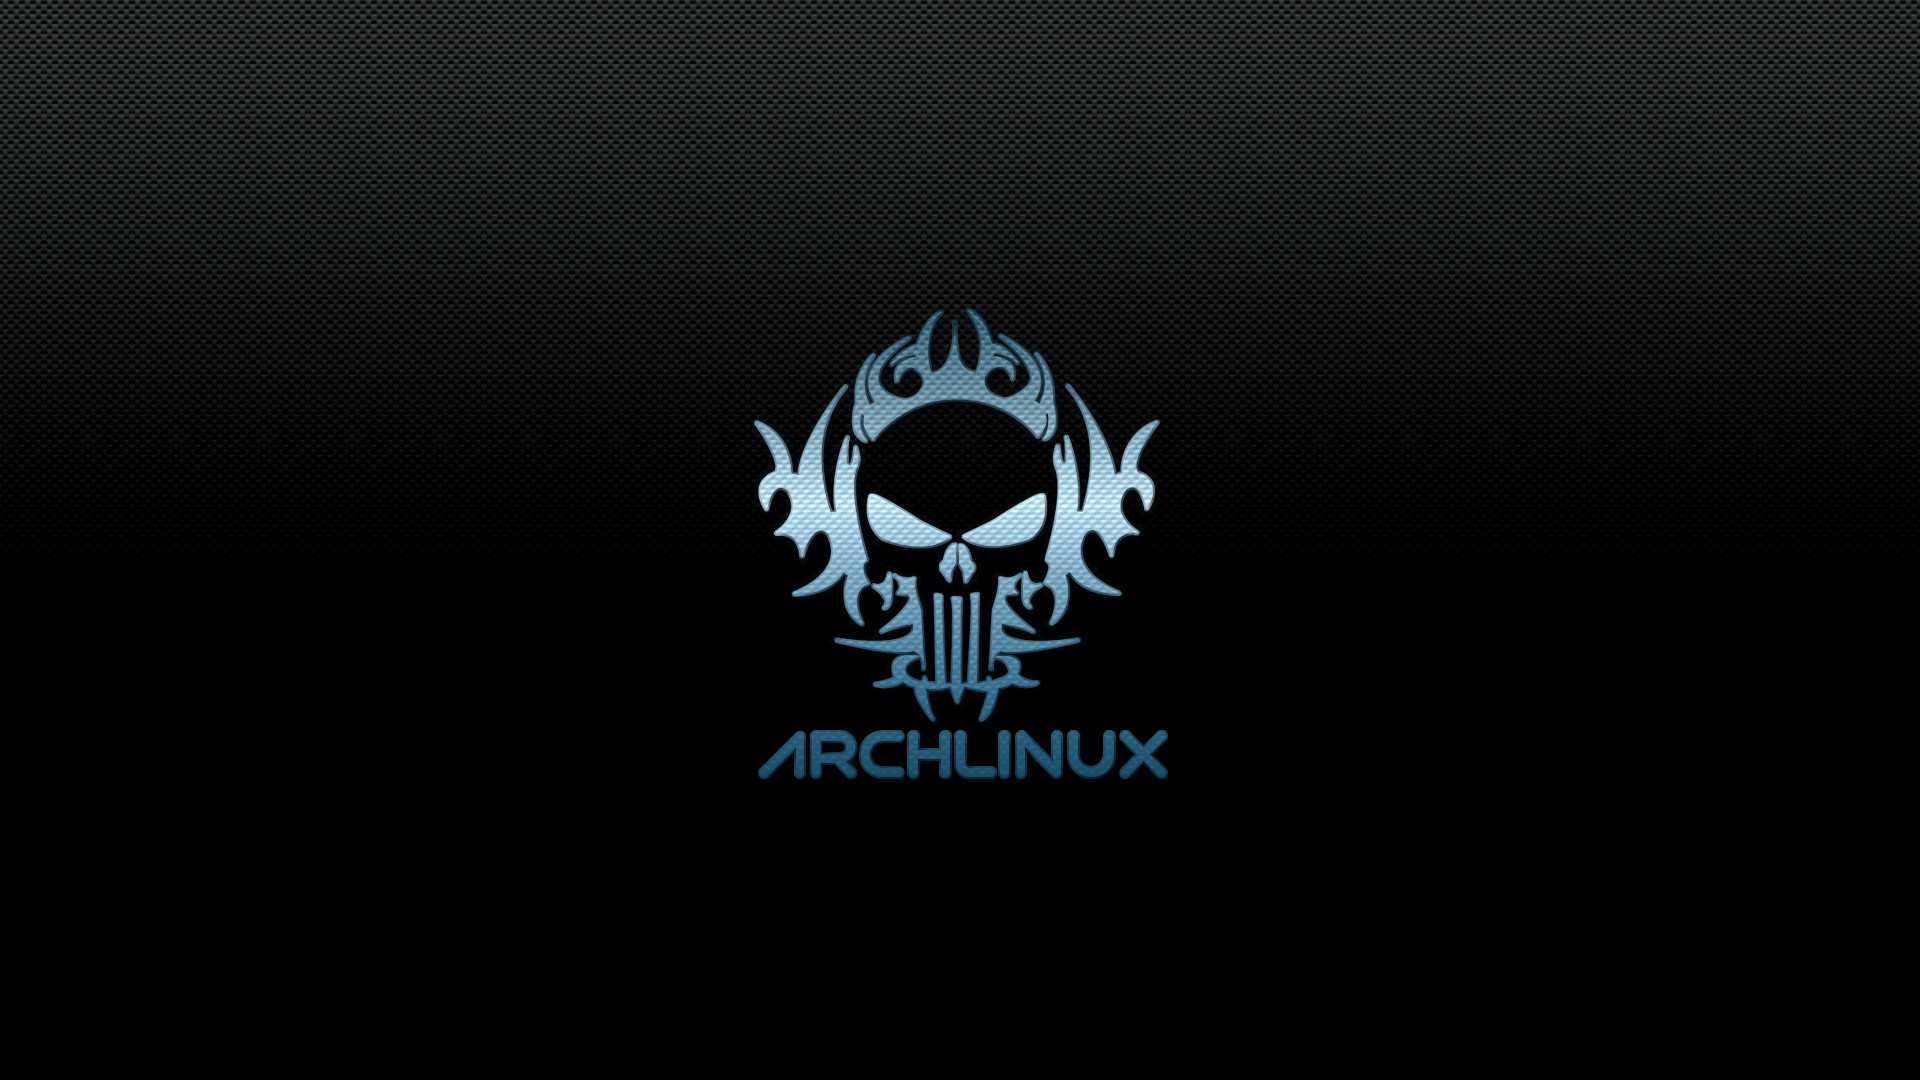 Arch Linux Black Os Wallpaper With